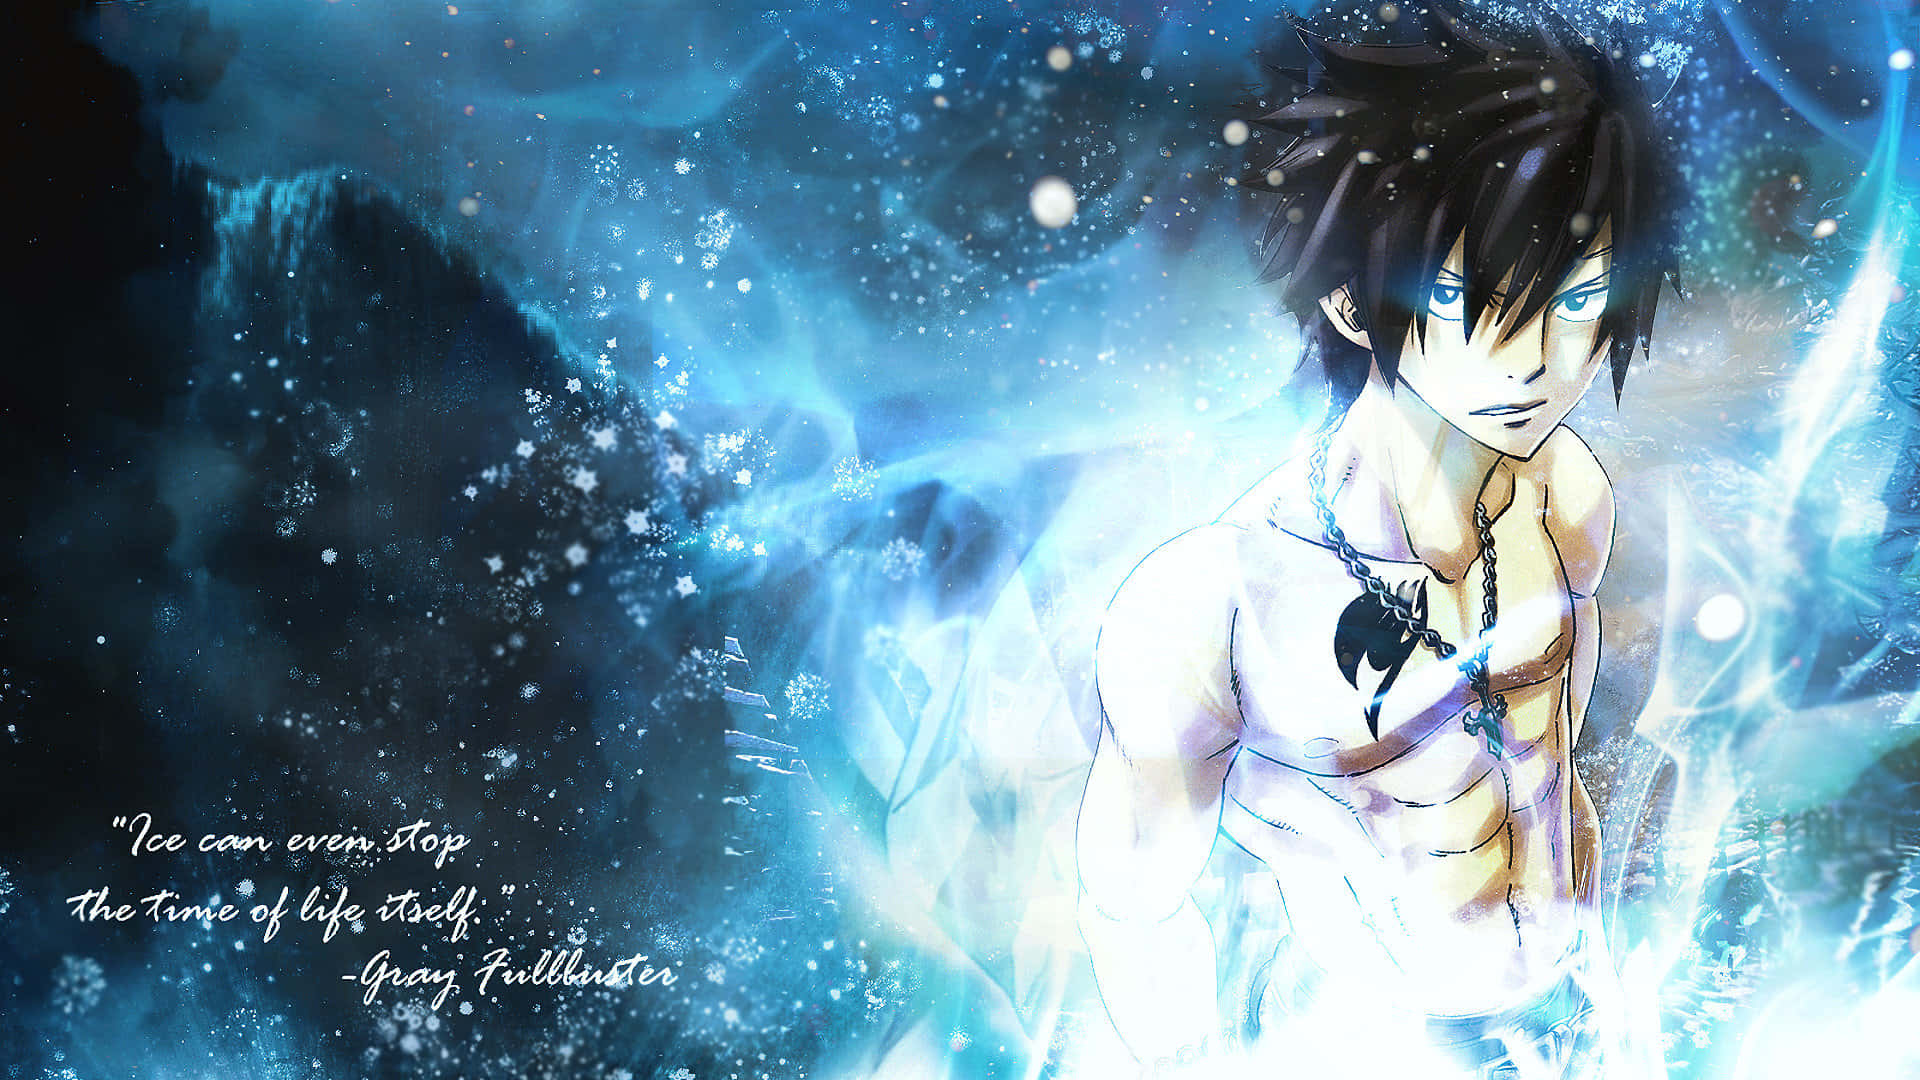 Gray Fullbuster Shines in the World of Magic Wallpaper